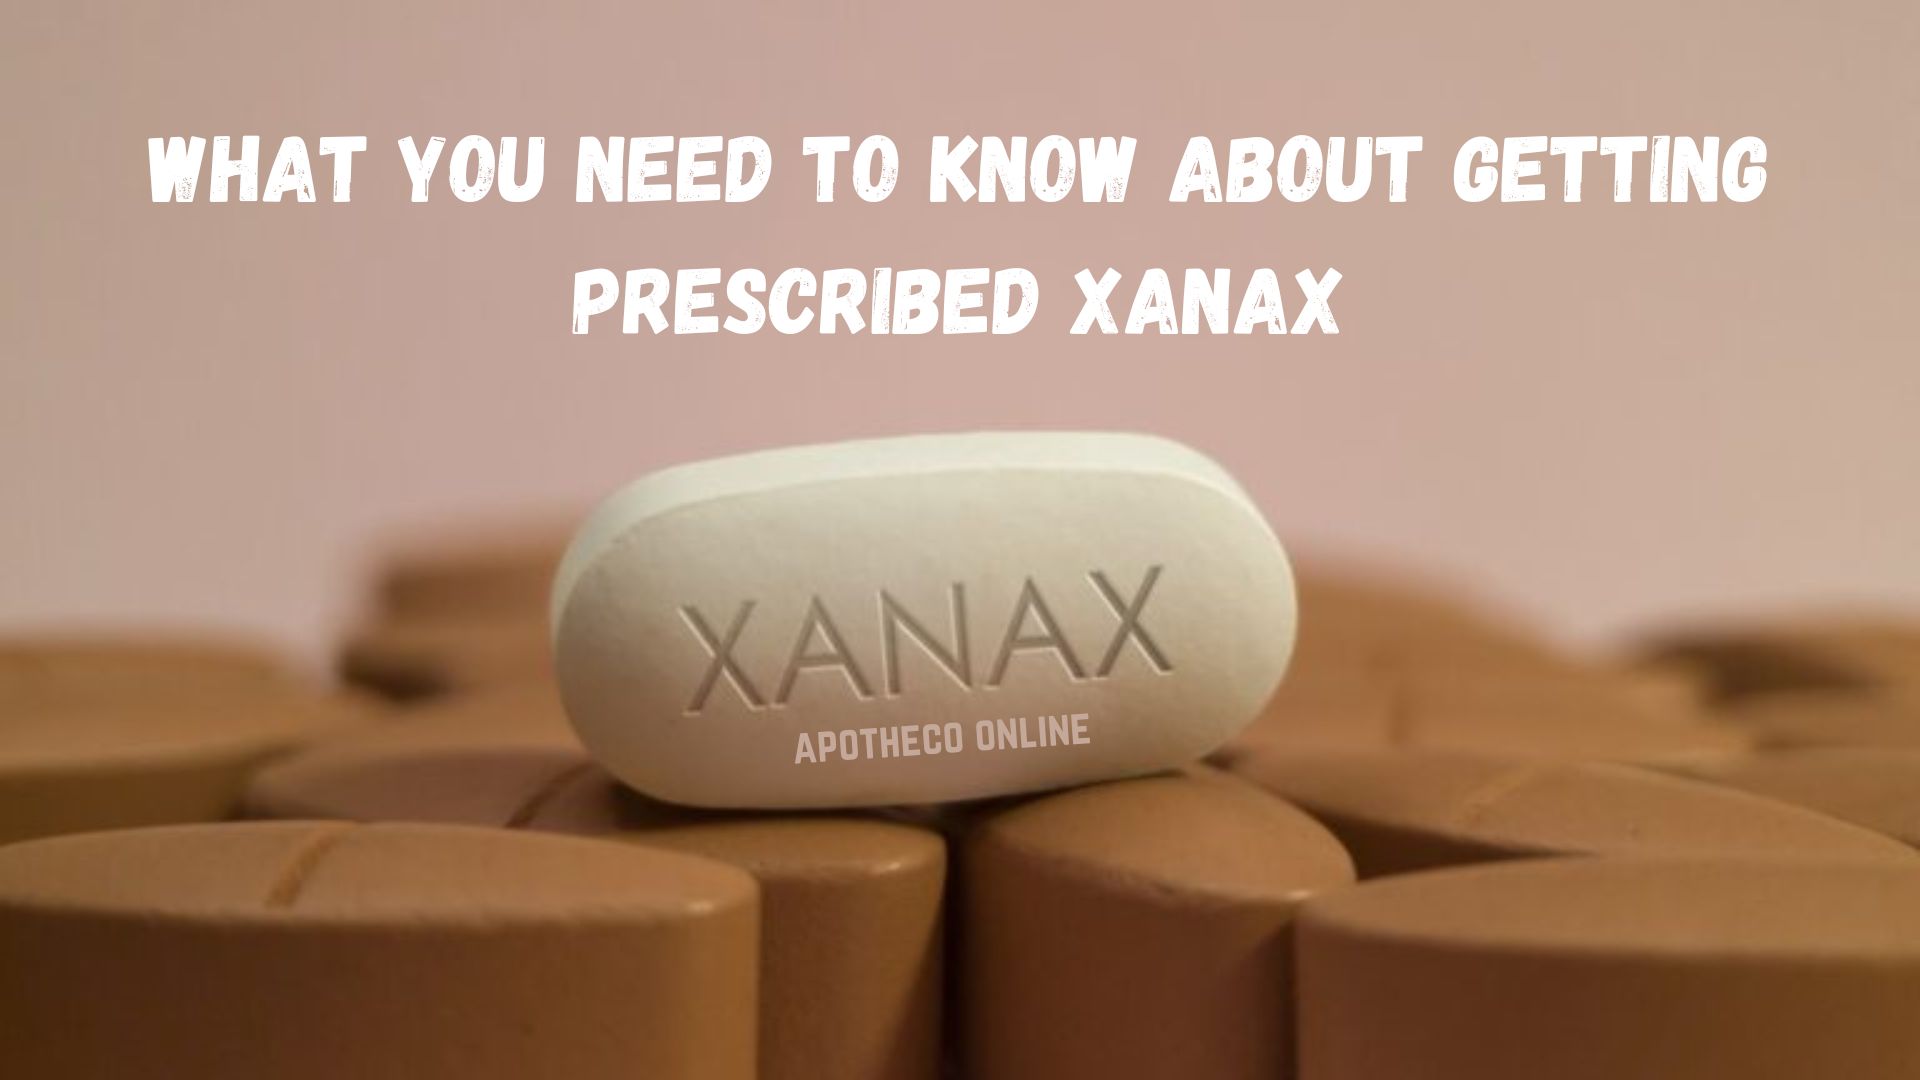 WHAT YOU NEED TO KNOW ABOUT GETTING PRESCRIBED XANAX